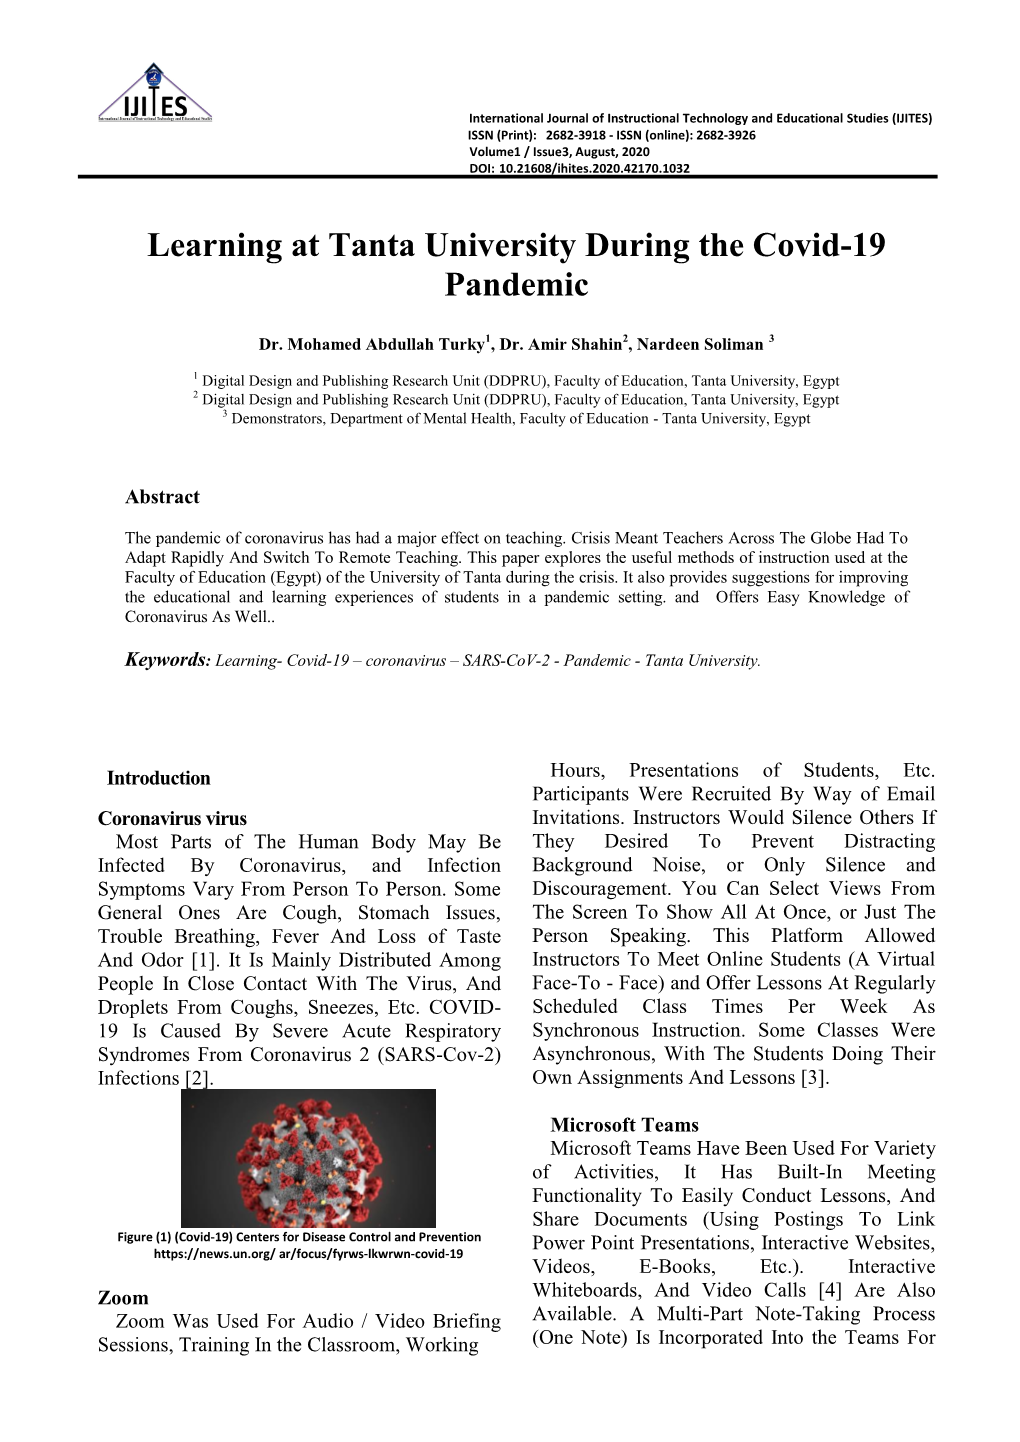 Learning at Tanta University During the Covid-19 Pandemic